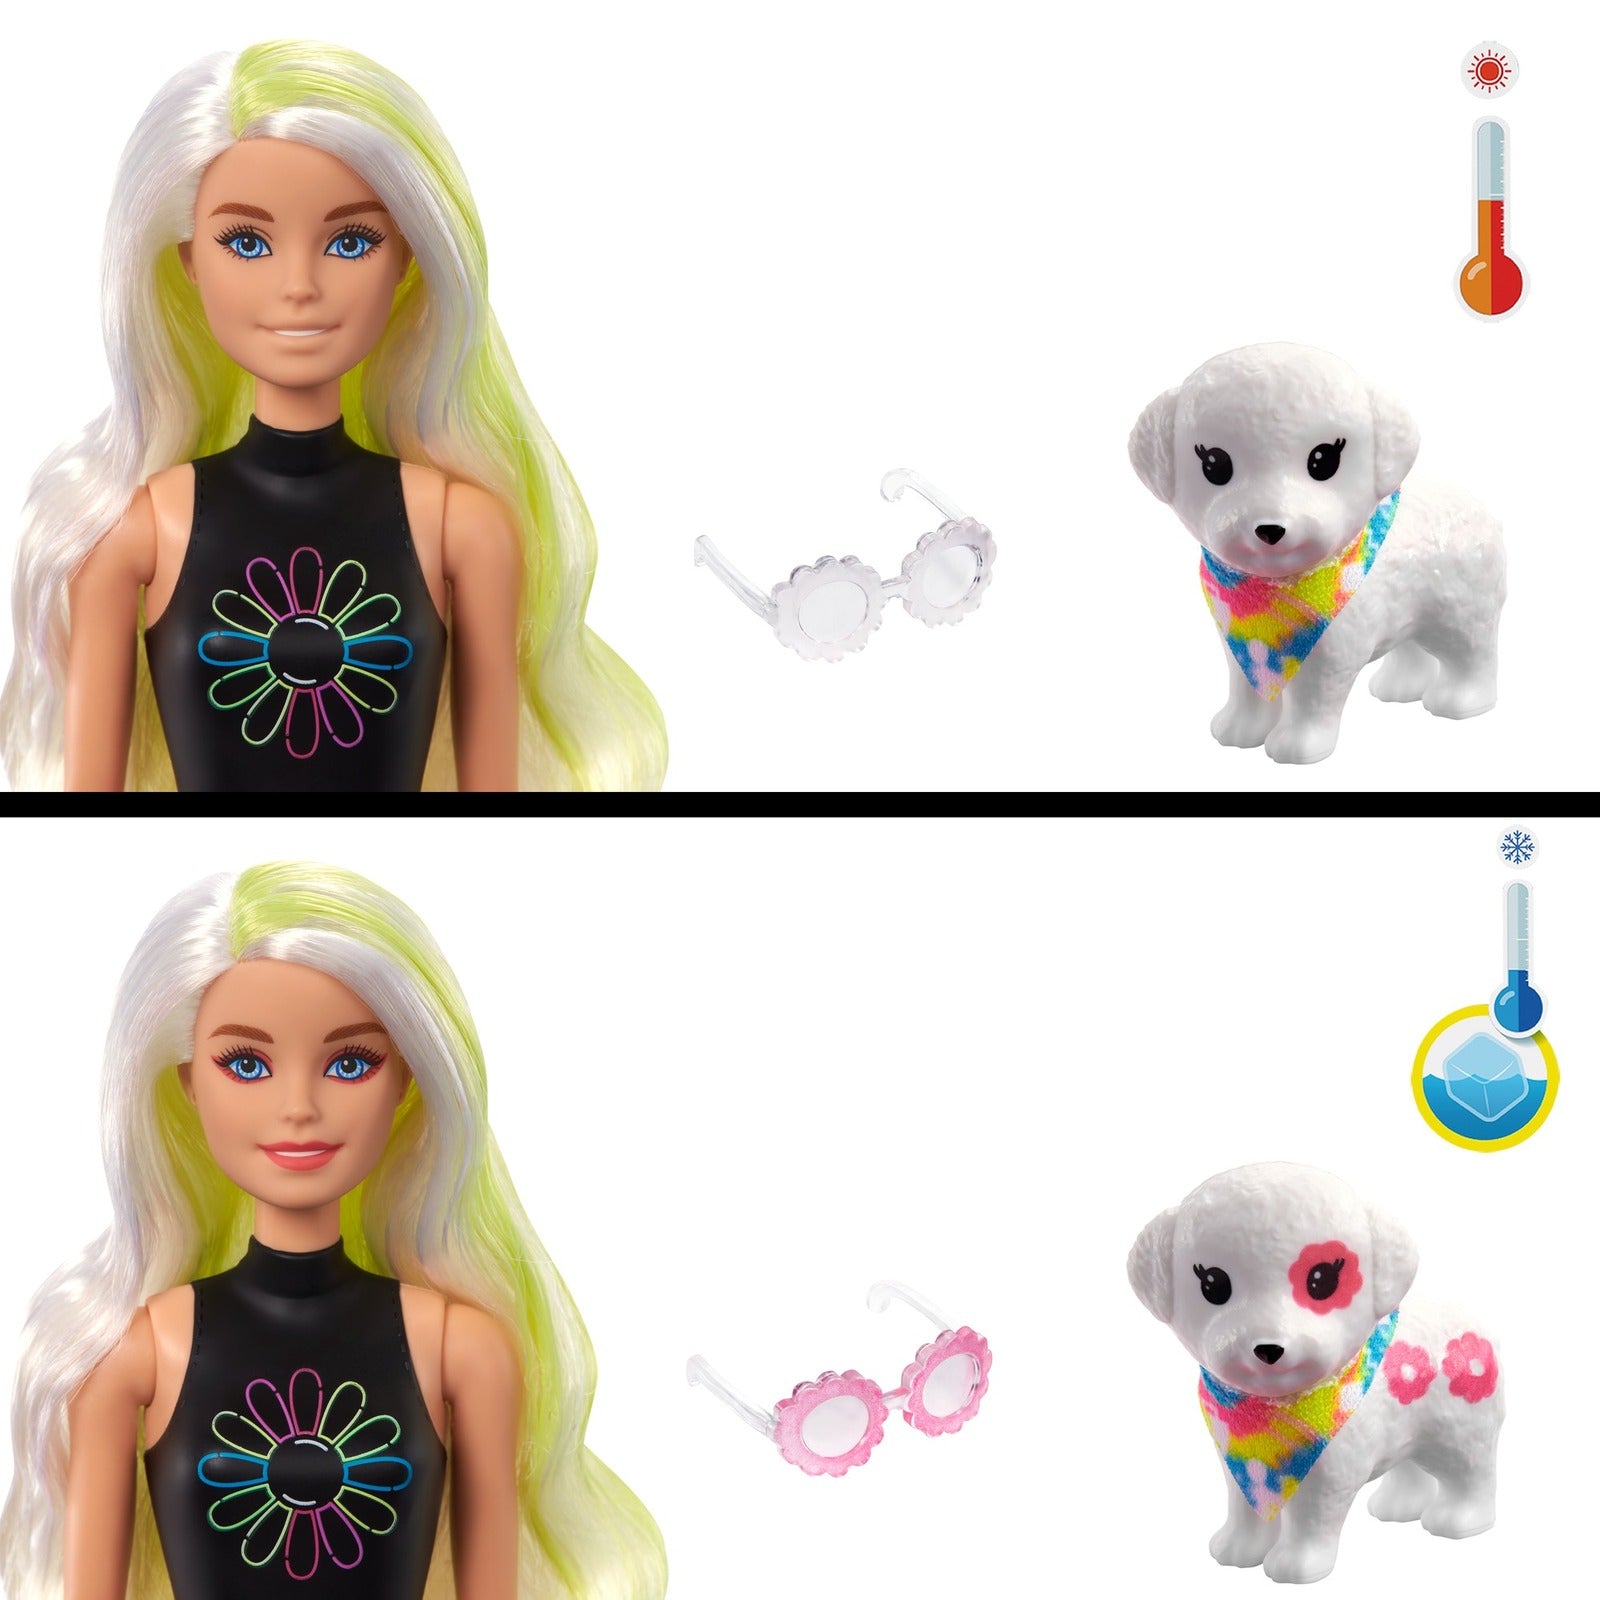  Barbie Color Reveal Set, Tie-Dye Fashion Maker, Color Reveal  Barbie Doll, Chelsea Doll and Pet, Tie-Dye Tools and Dye-able Fashions :  Toys & Games